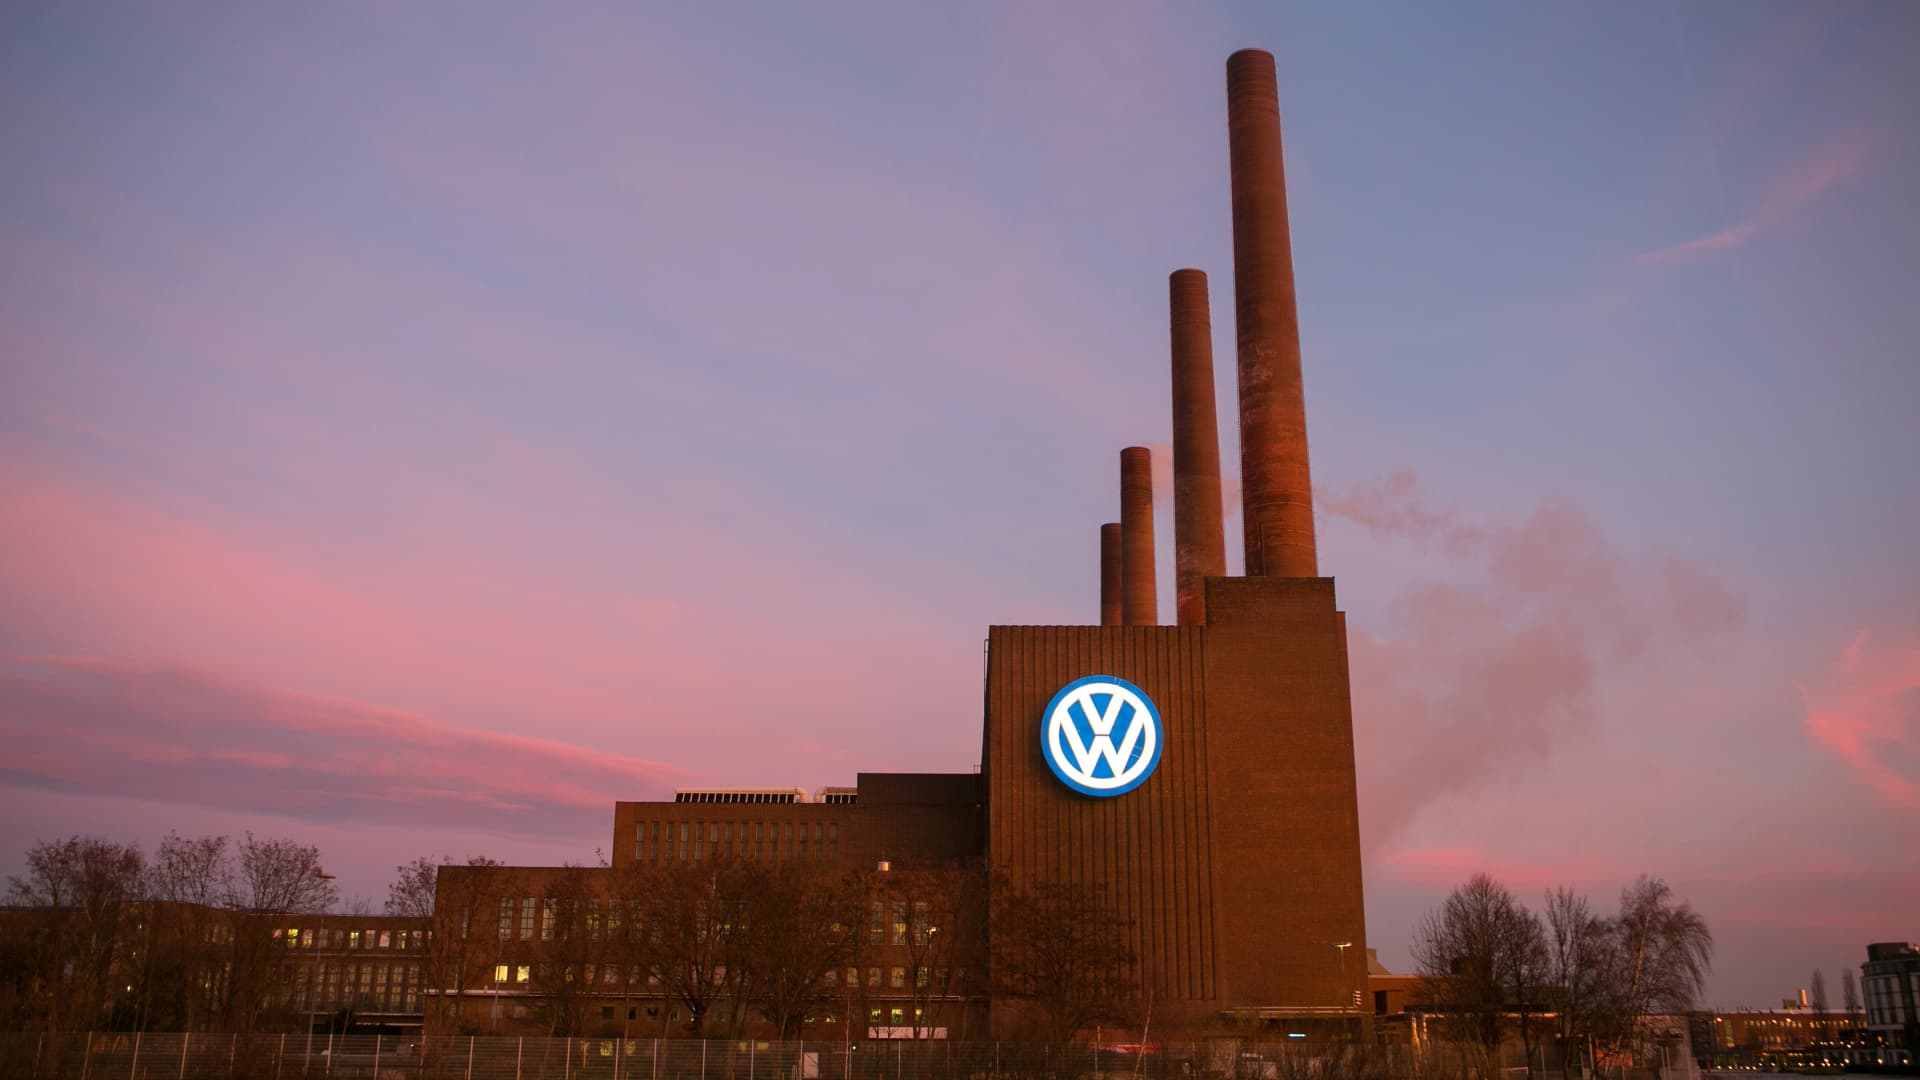 Volkswagen announces five-year $193 billion investment plan as electrification gathers pace